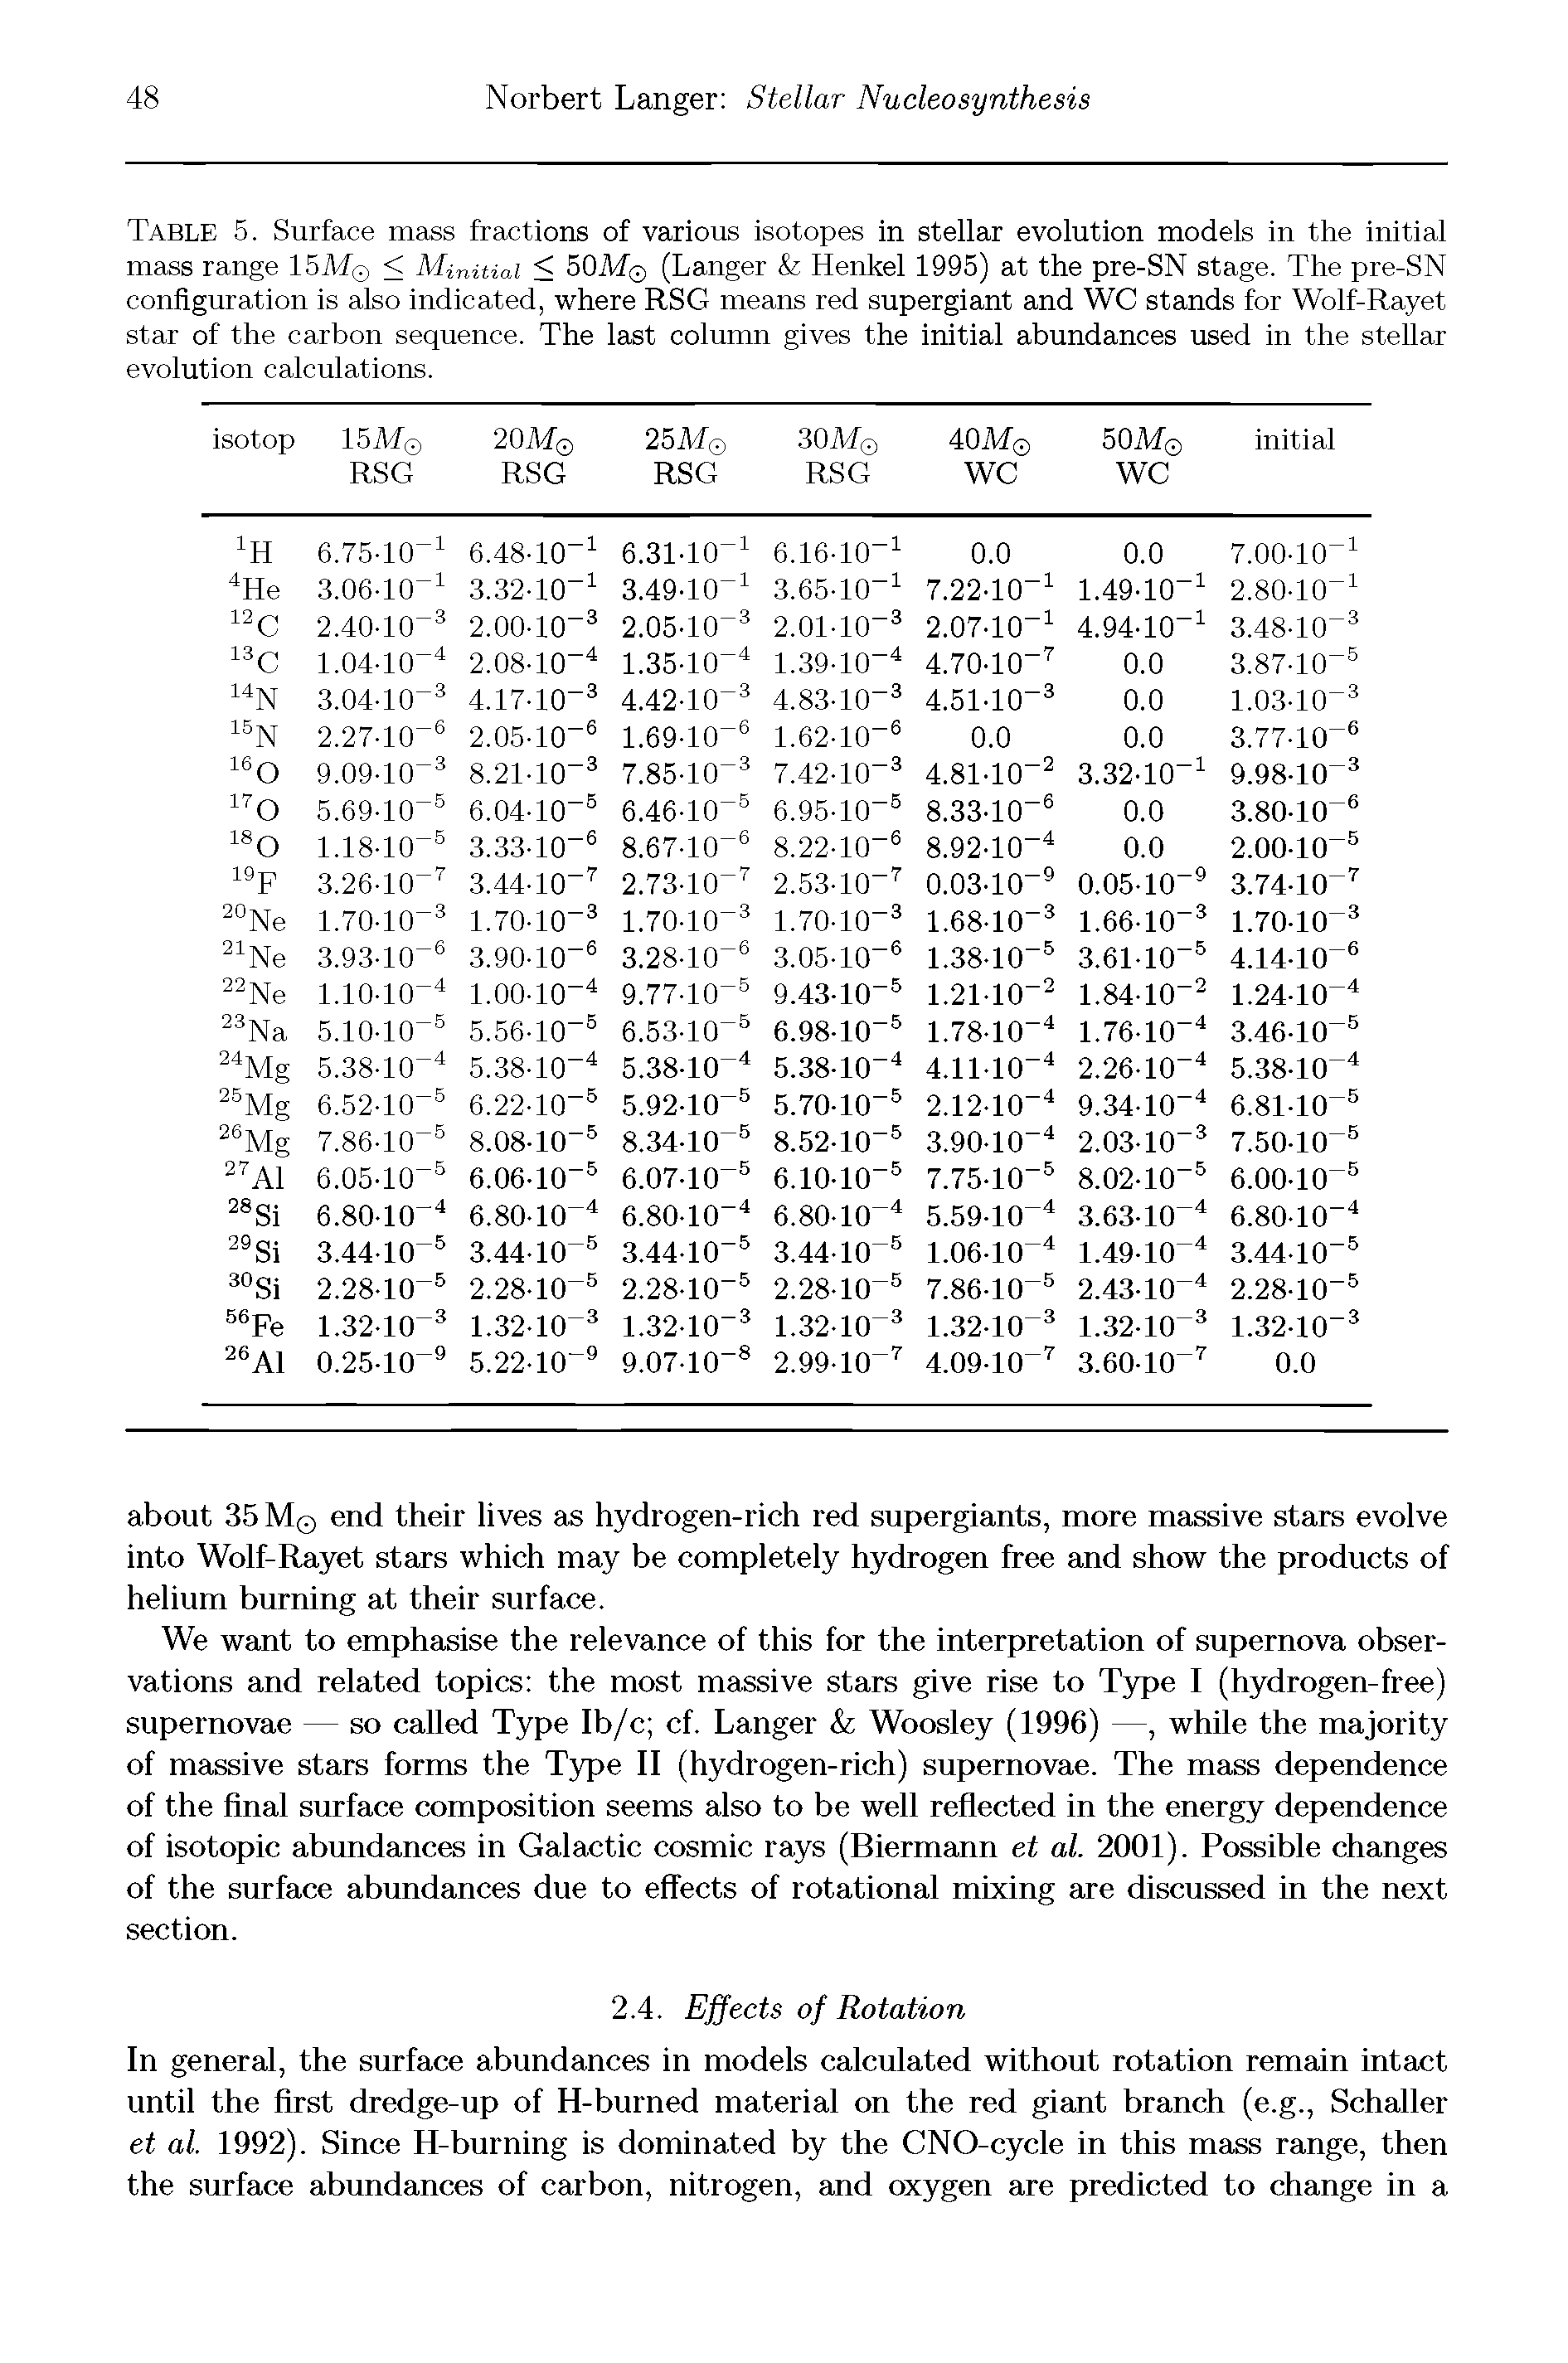 Table 5. Surface mass fractions of various isotopes in stellar evolution models in the initial mass range 15M0 < Minitiai < 50M (Langer Henkel 1995) at the pre-SN stage. The pre-SN configuration is also indicated, where RSG means red supergiant and WC stands for Wolf-Rayet star of the carbon sequence. The last column gives the initial abundances used in the stellar evolution calculations.